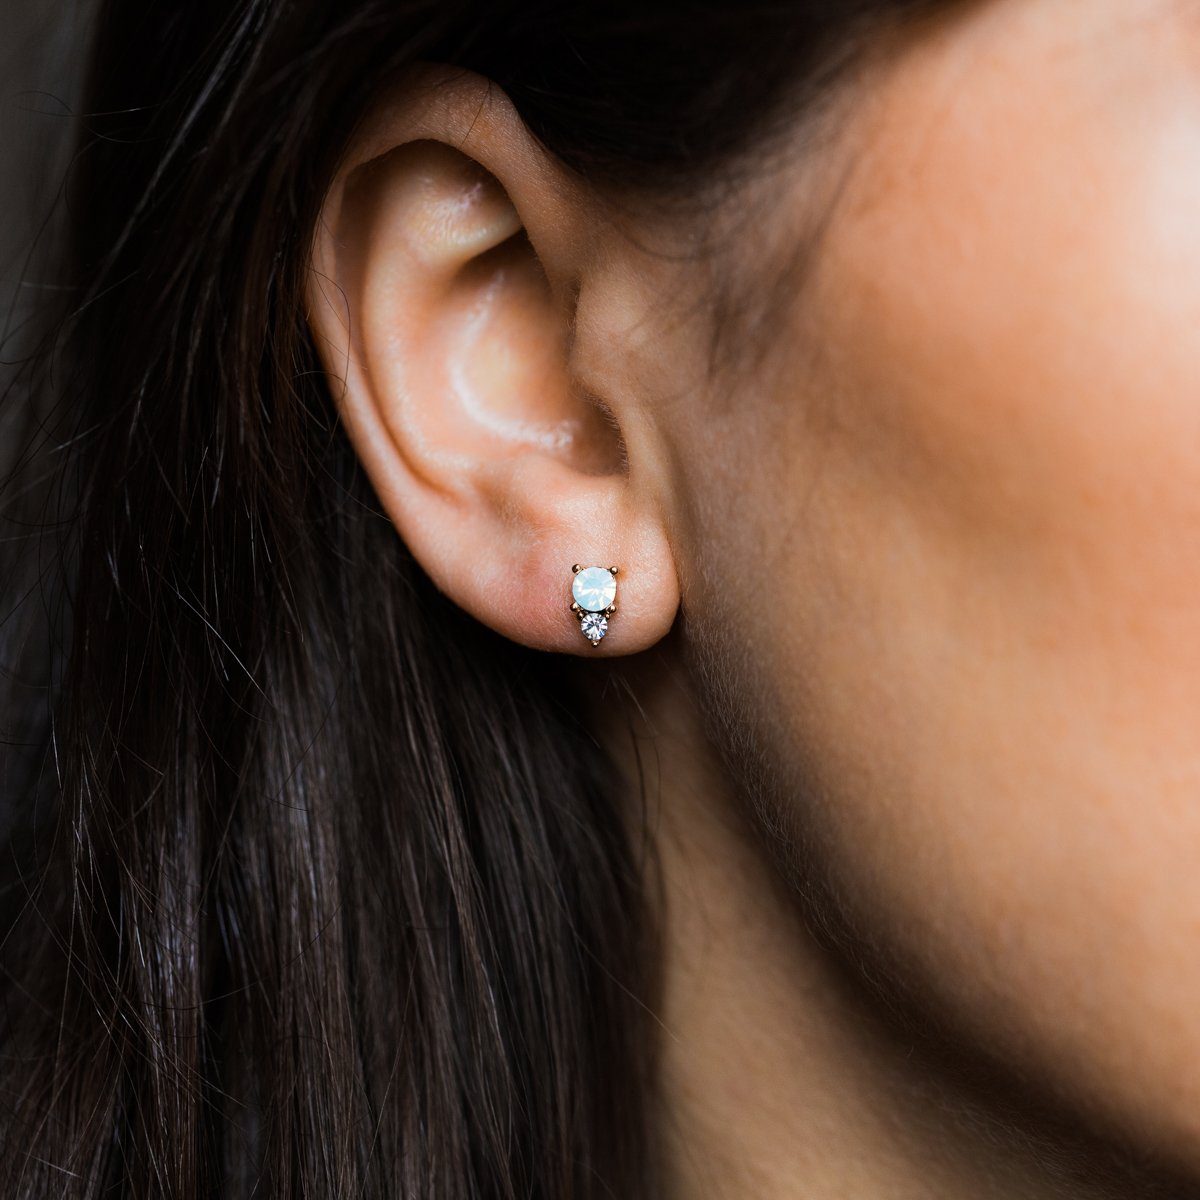 Dolce Studs in White Opal - earrings - Lover's Tempo local eclectic